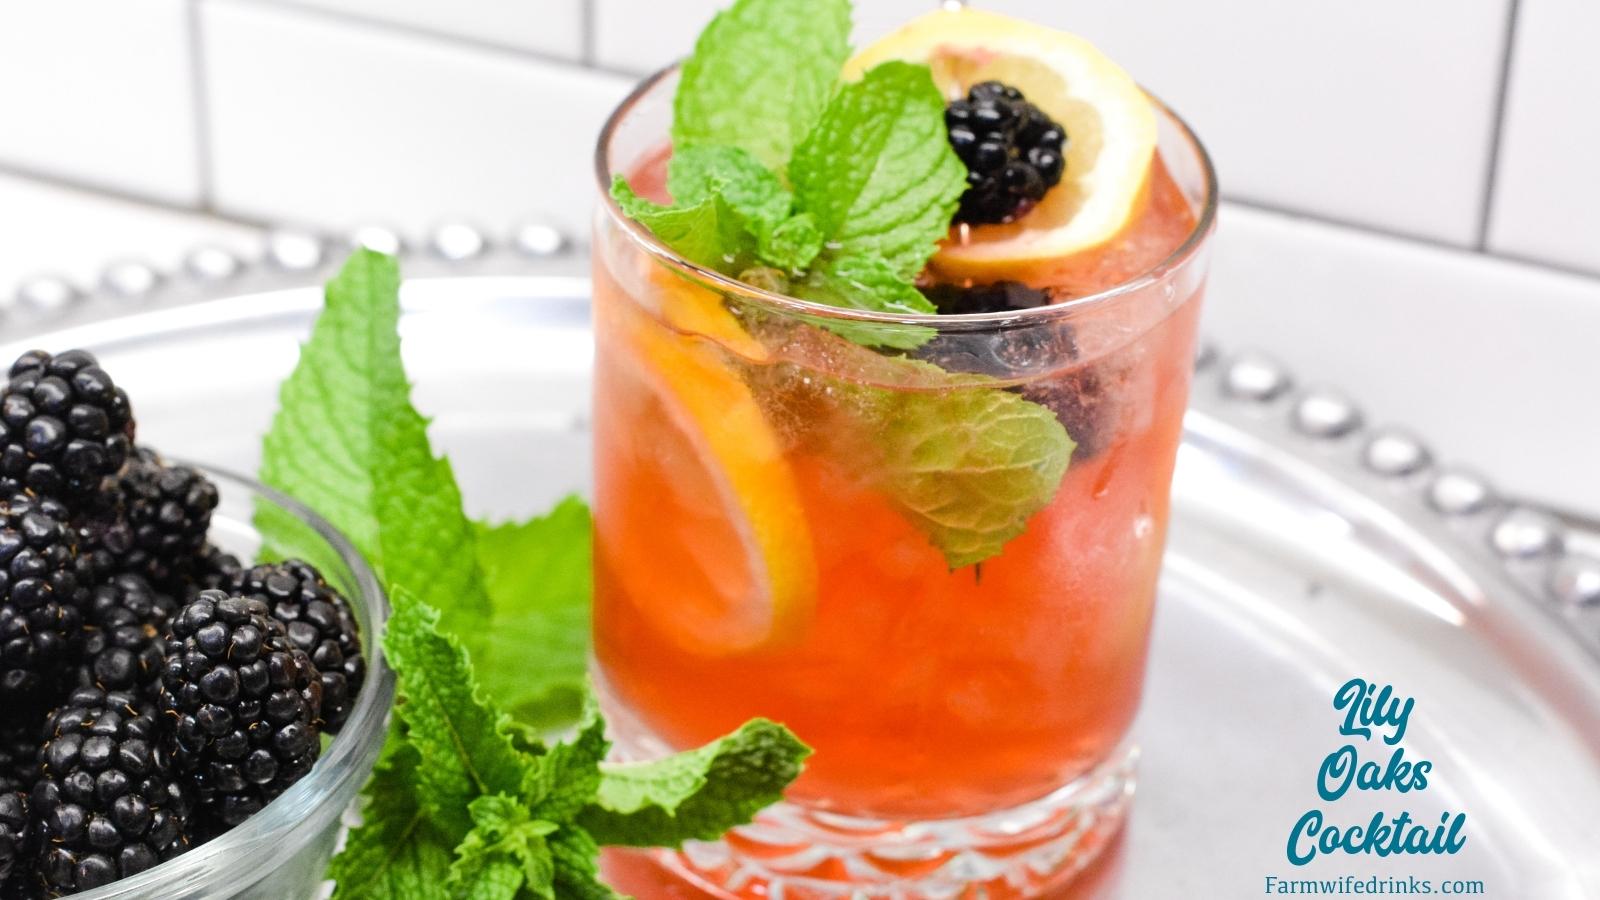 The Lily Oaks drink is a combination of cranberry juice, orange liqueur, lemonade, and vodka combined and garnished with mint, lemon, and blackberries.